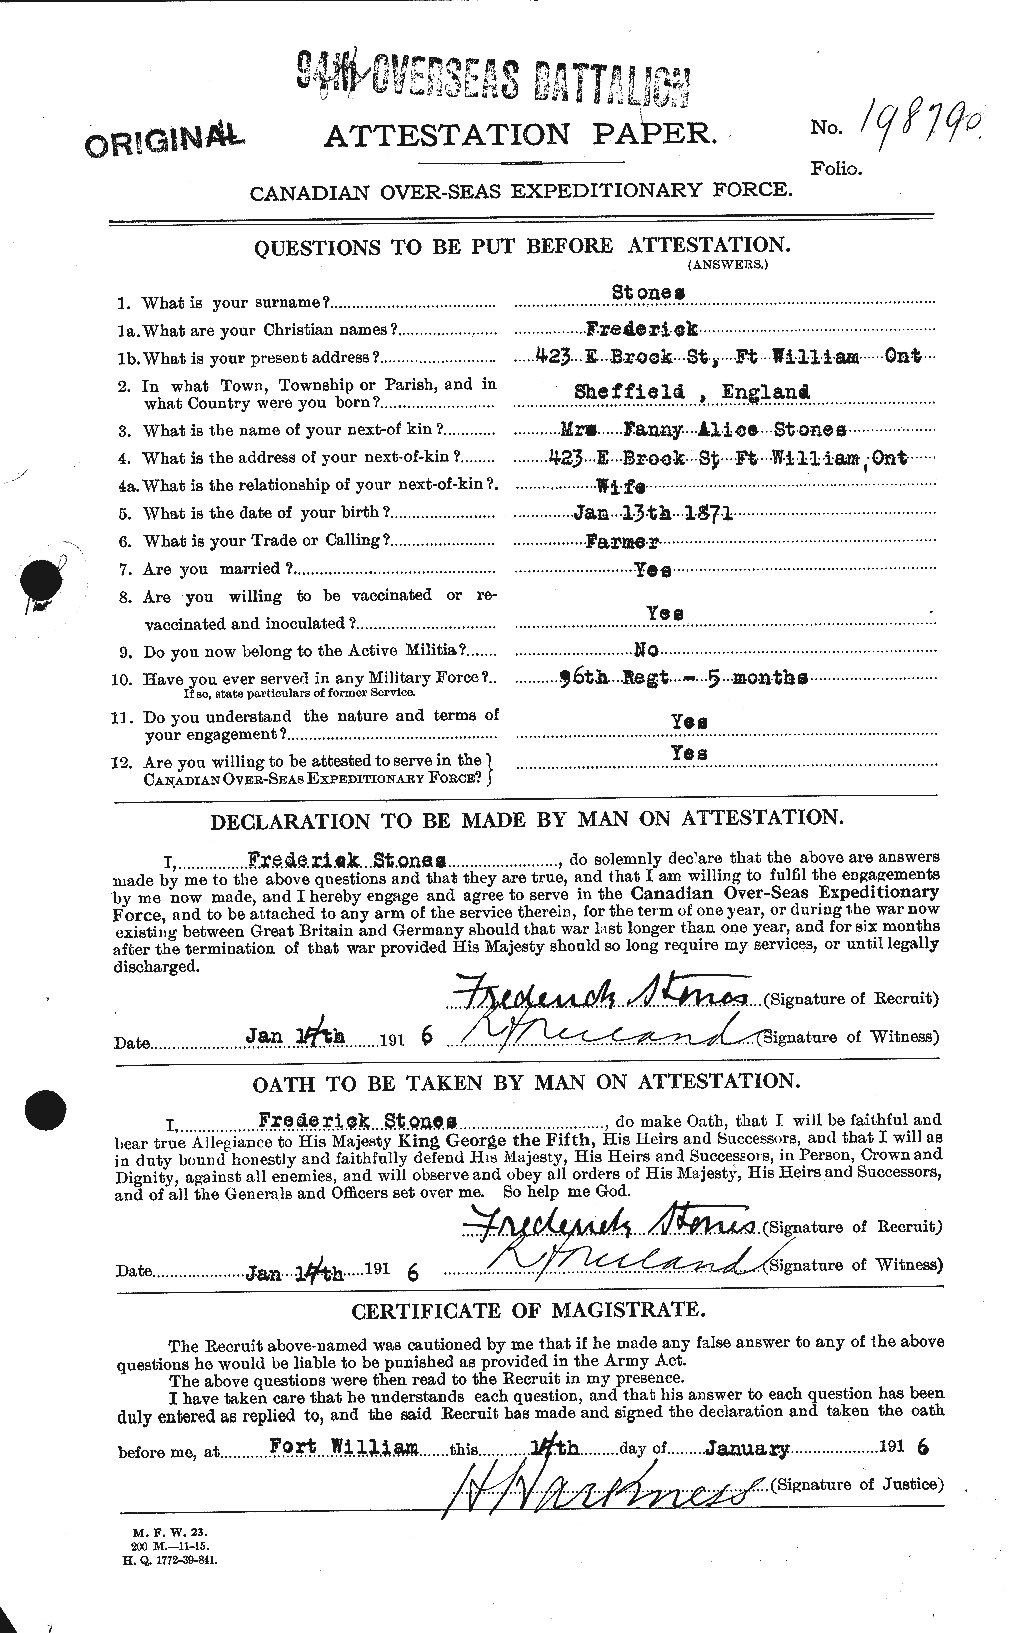 Personnel Records of the First World War - CEF 121469a